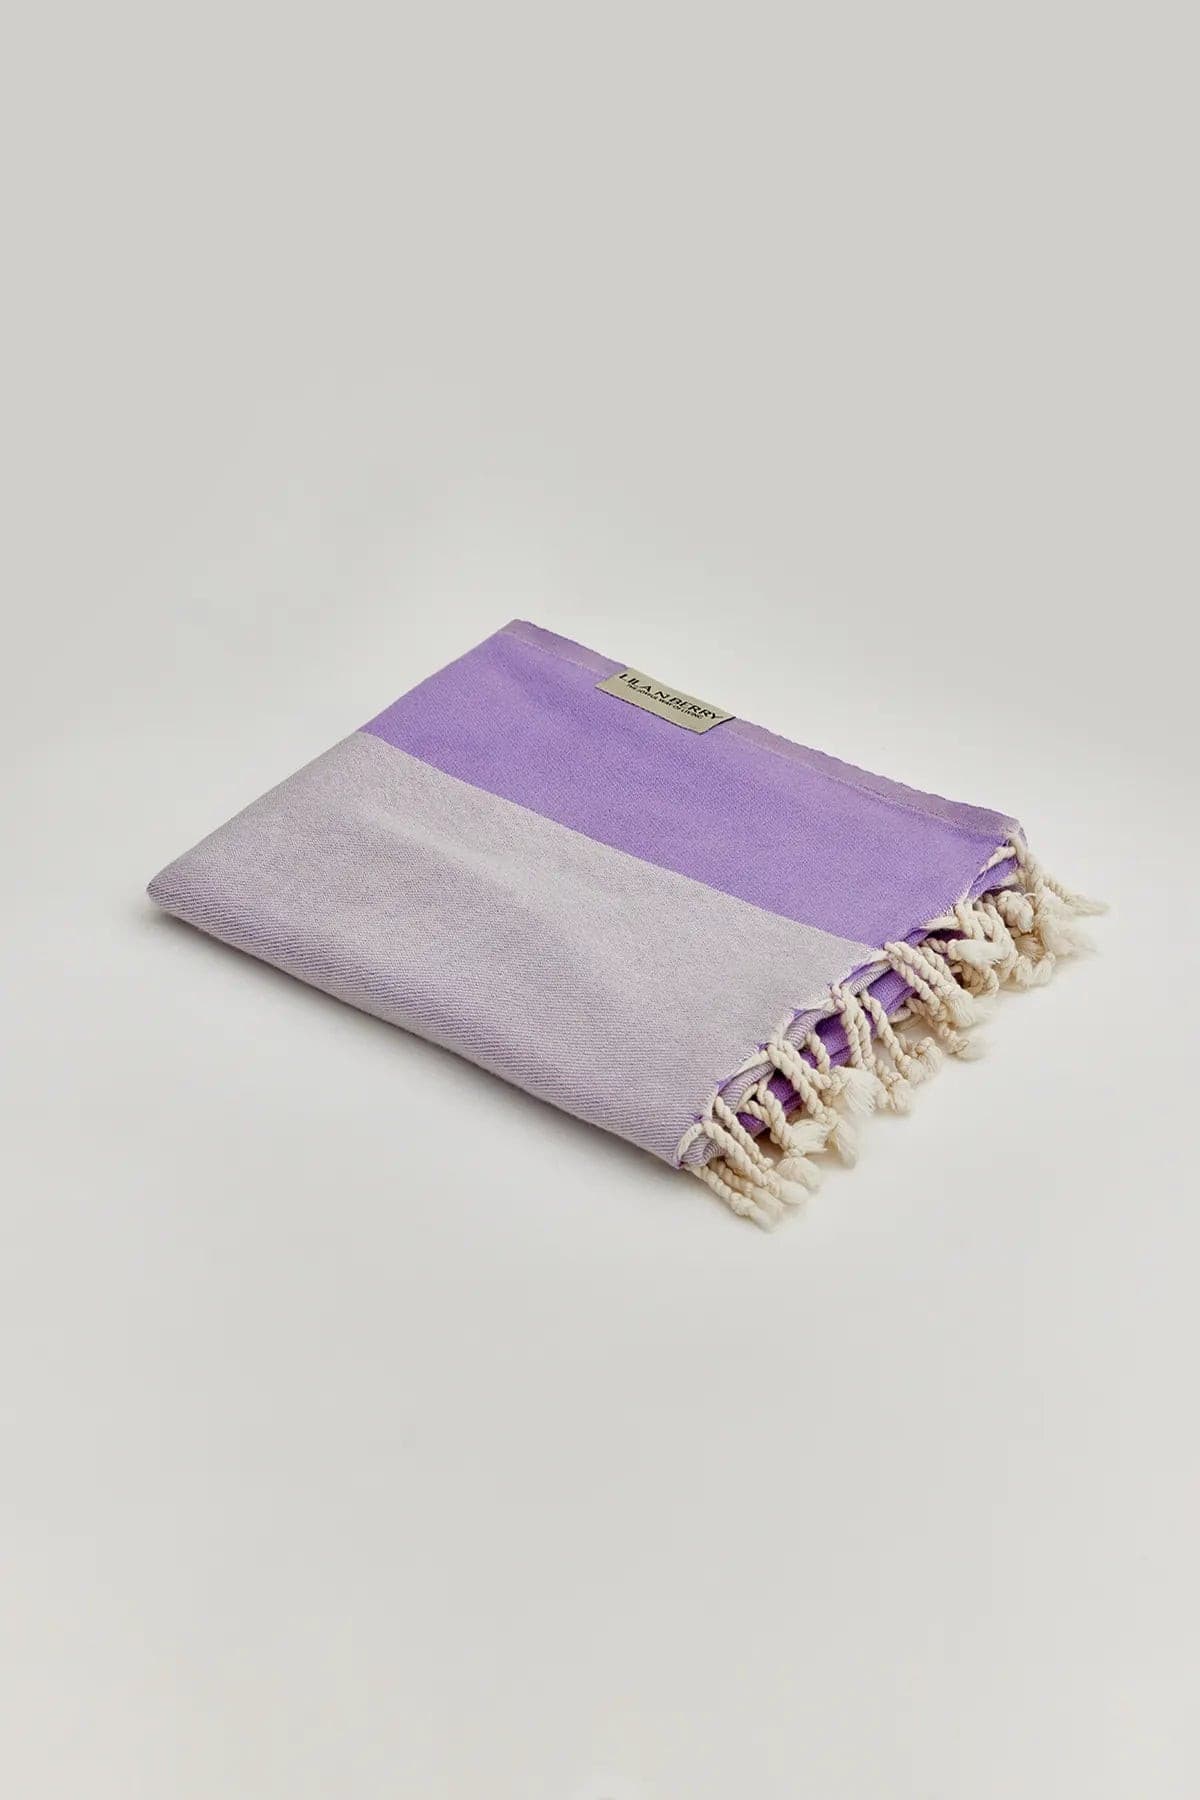 Beach/Bath,Lilac,Turkish towel, folded,summer,line patterned,double-faces,purified sand,light,compact, easy pack,fun, recycled